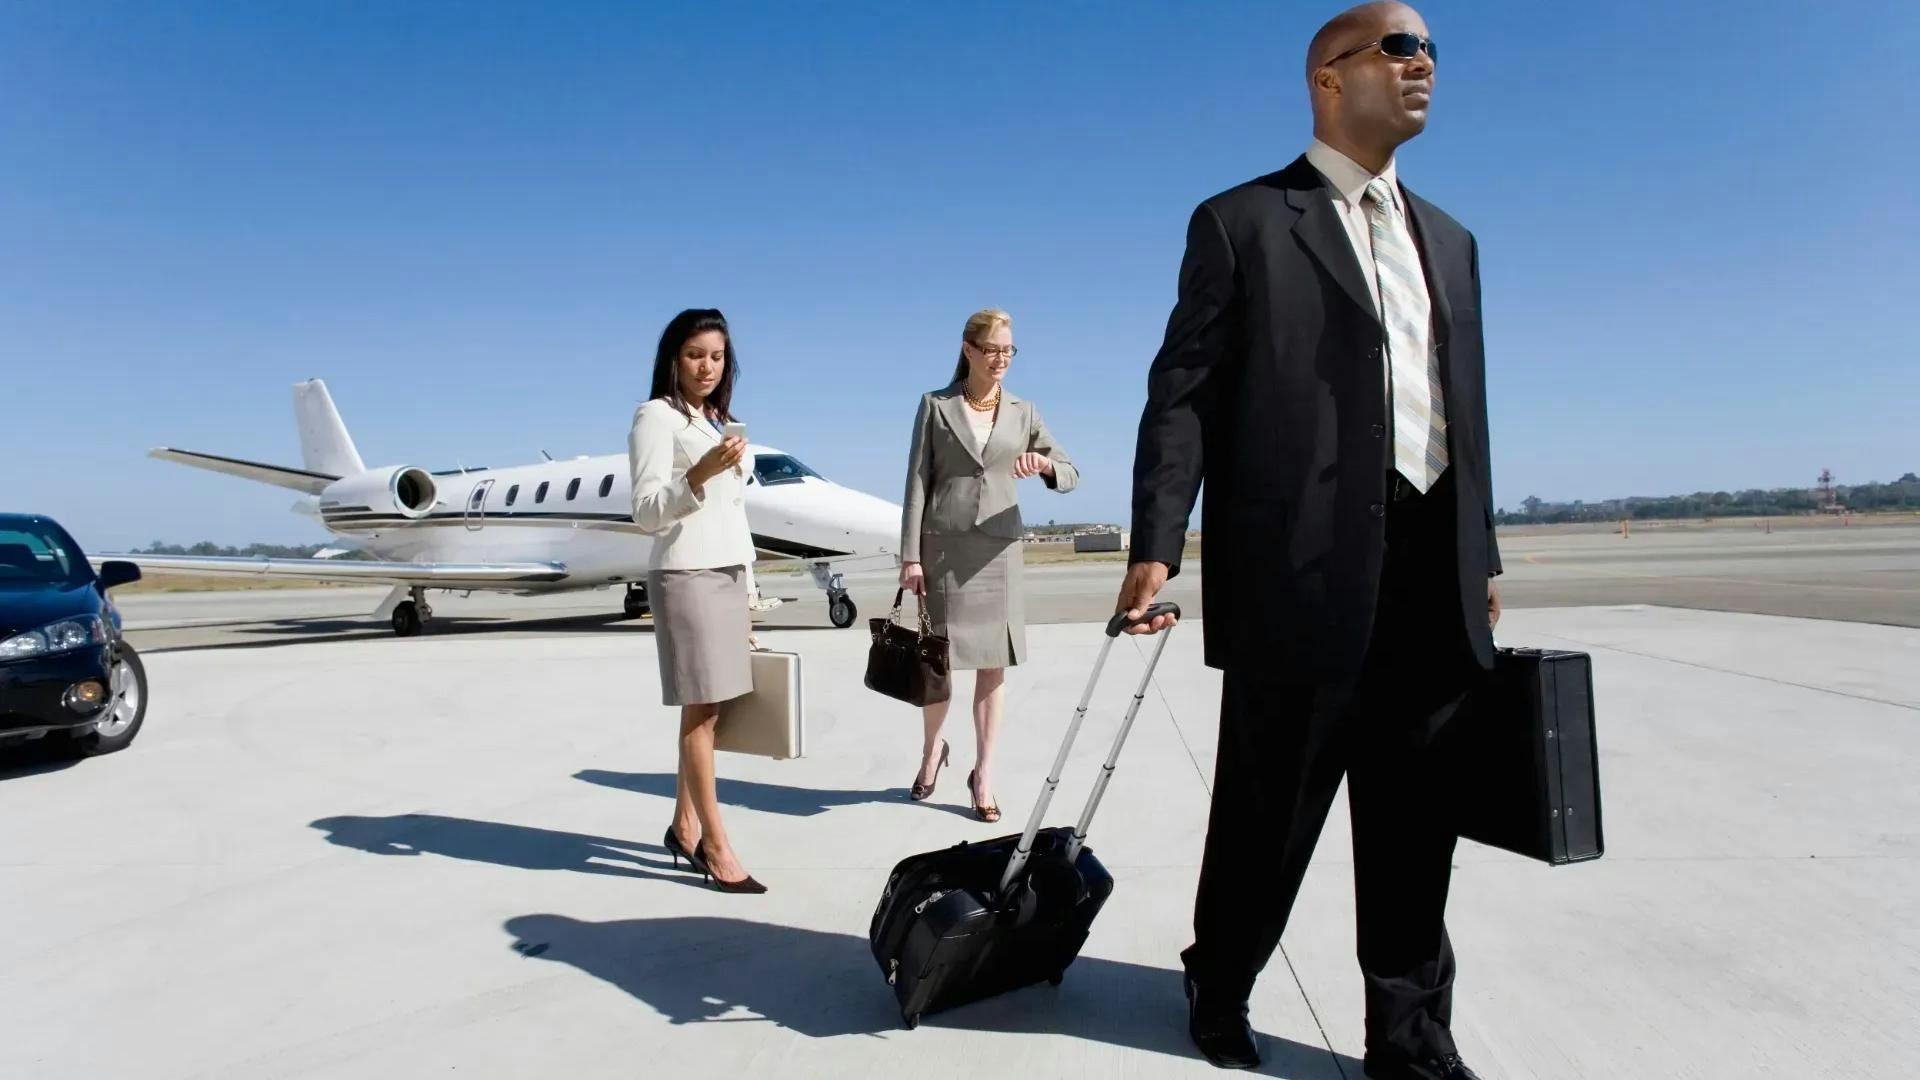 Clients in the runway after arriving to their destination.